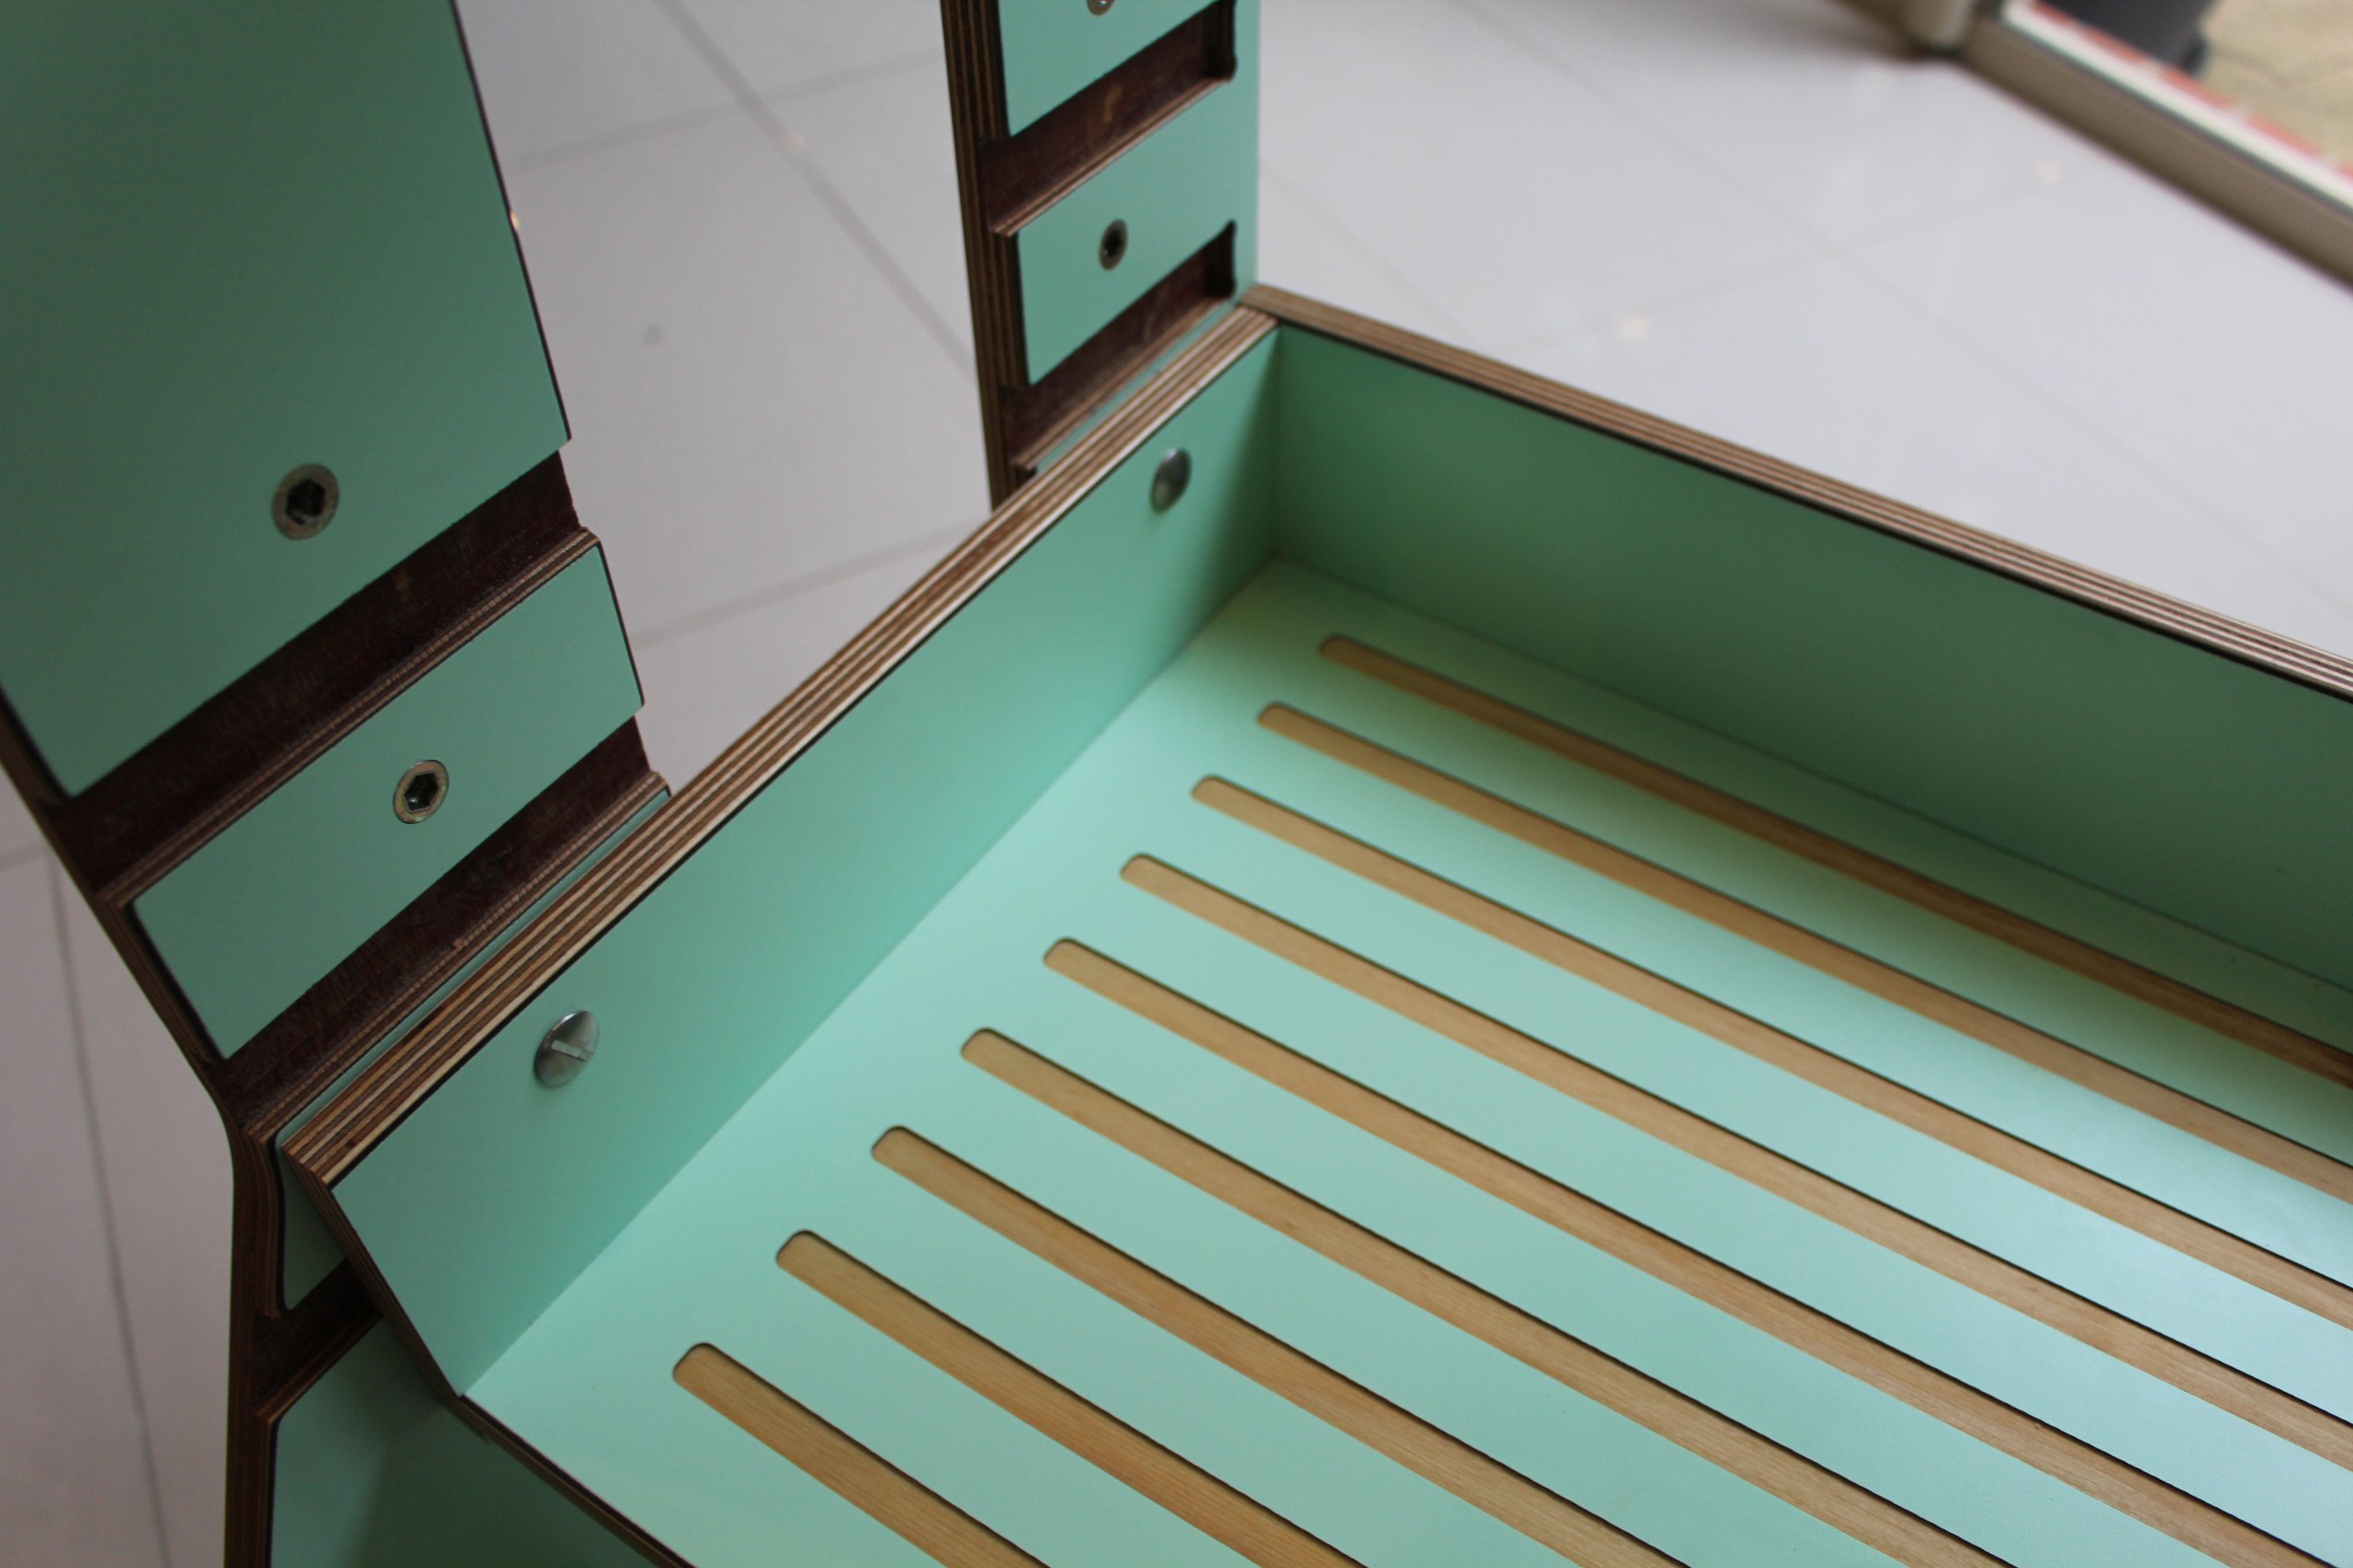 plyco's mint green decoply in use